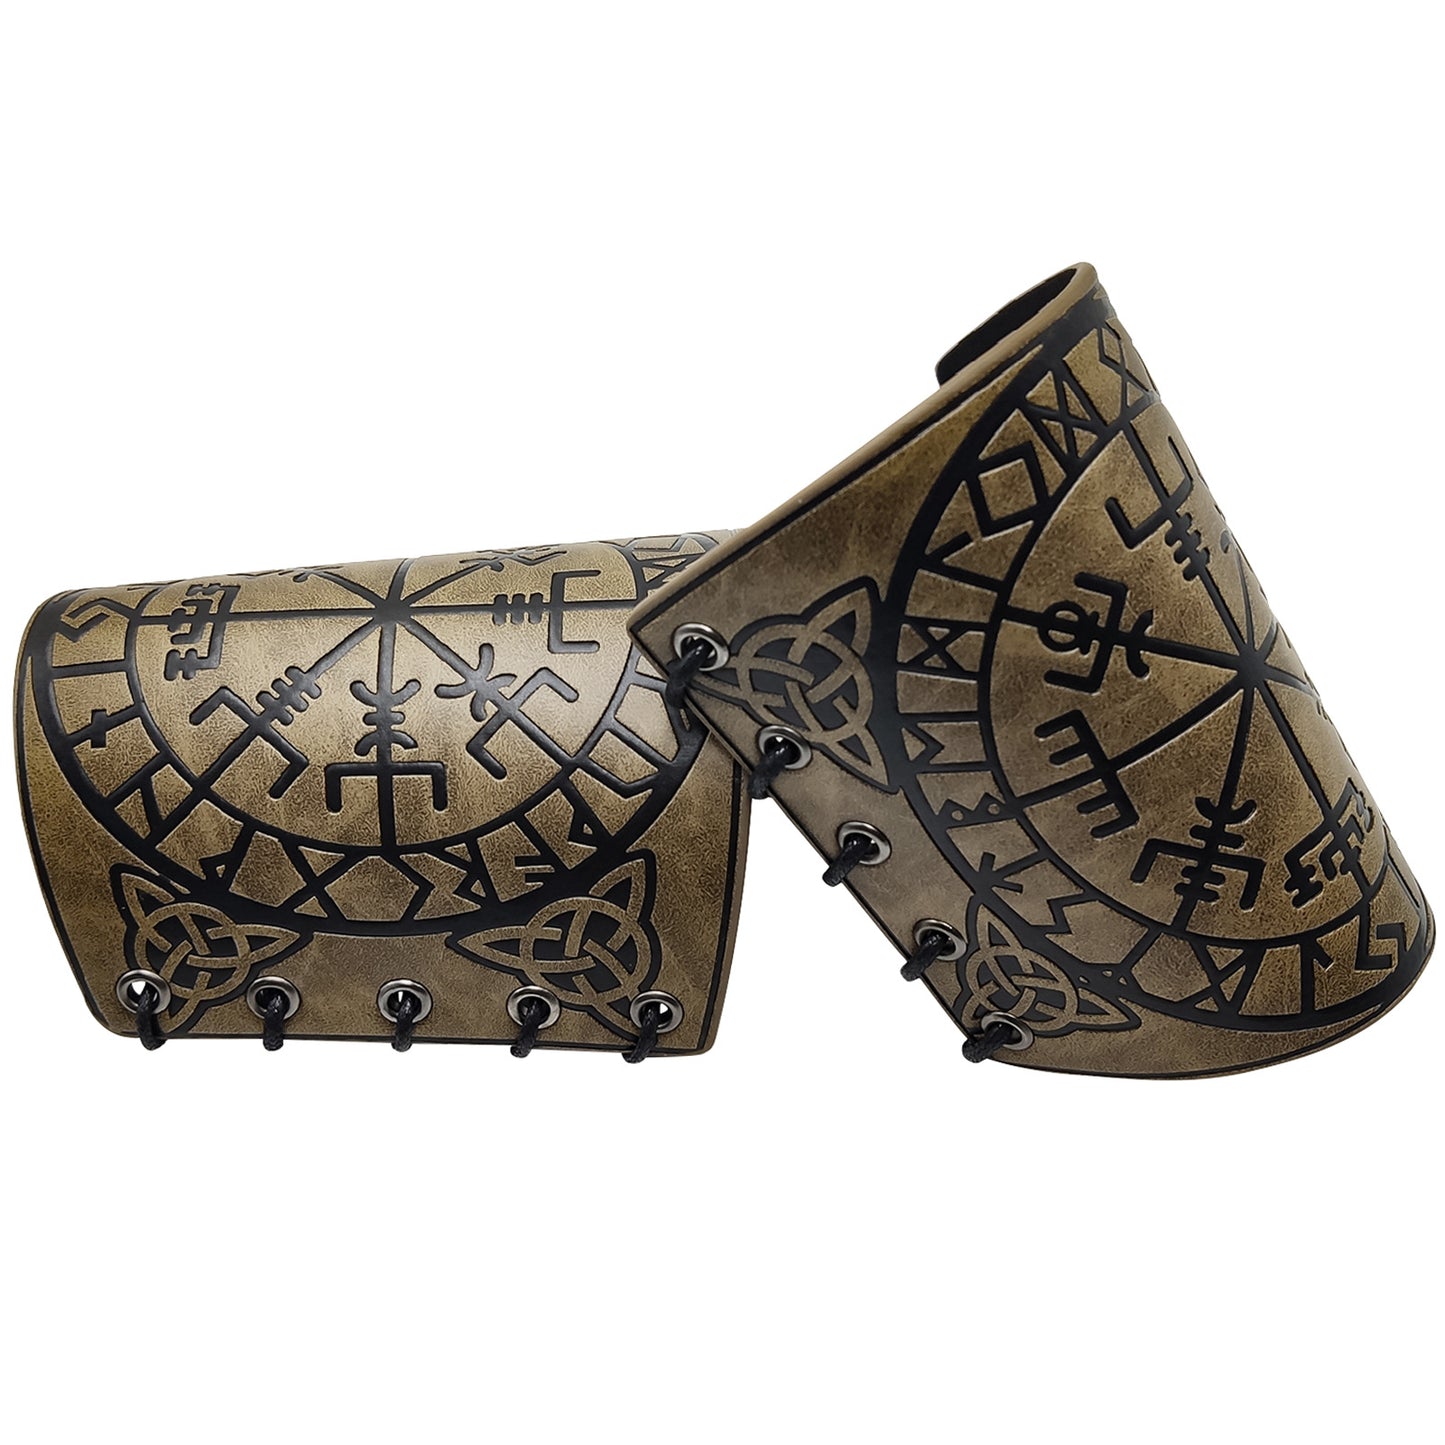 Wristband of Giants Strength Medieval Renaissance COSPLAY PropsGiants Strength Medieval Renaissance COSPLAY Props
 Product information:
 
 Applicable age group: Adult
 
 Color: Black S00001, Brown S00002, khaki S00003
 
 Material: PU
 
 Scene: Daily wear, game parties, rock gatDungeonDice1